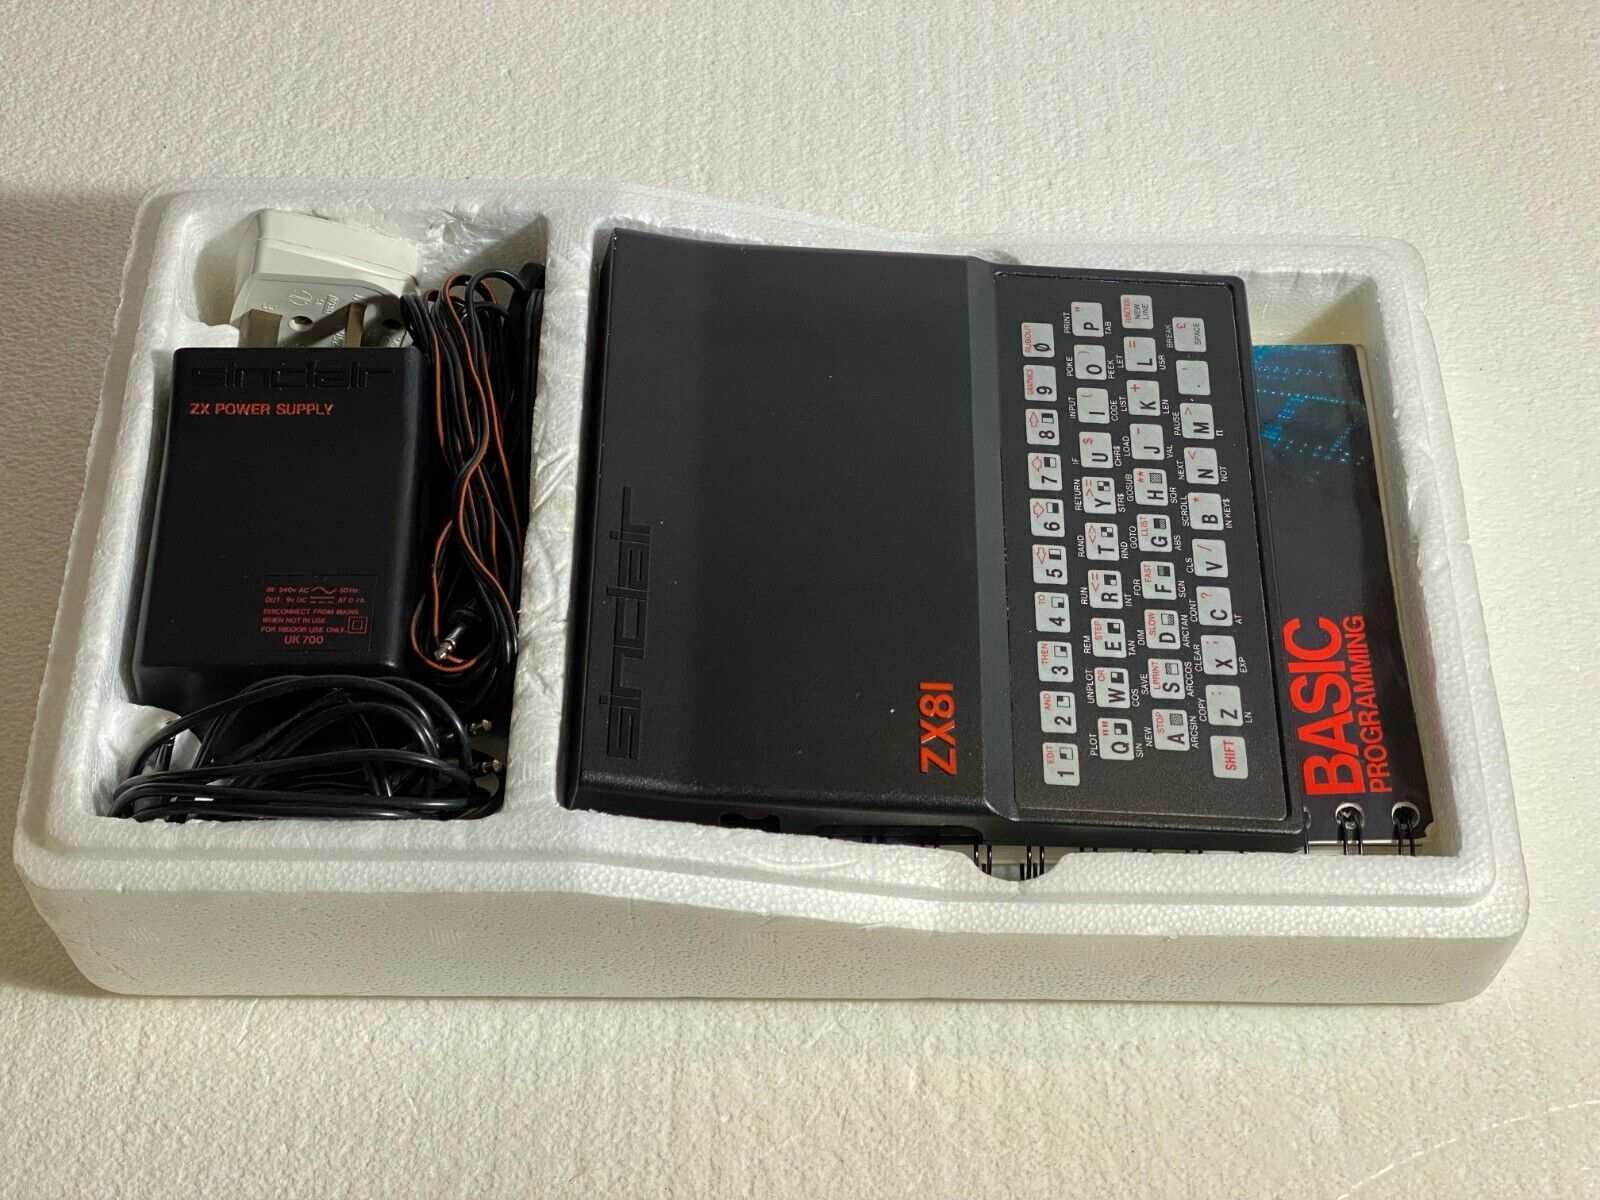 Sinclair ZX 81, ZX81, in a box, very good condition, working, CIB